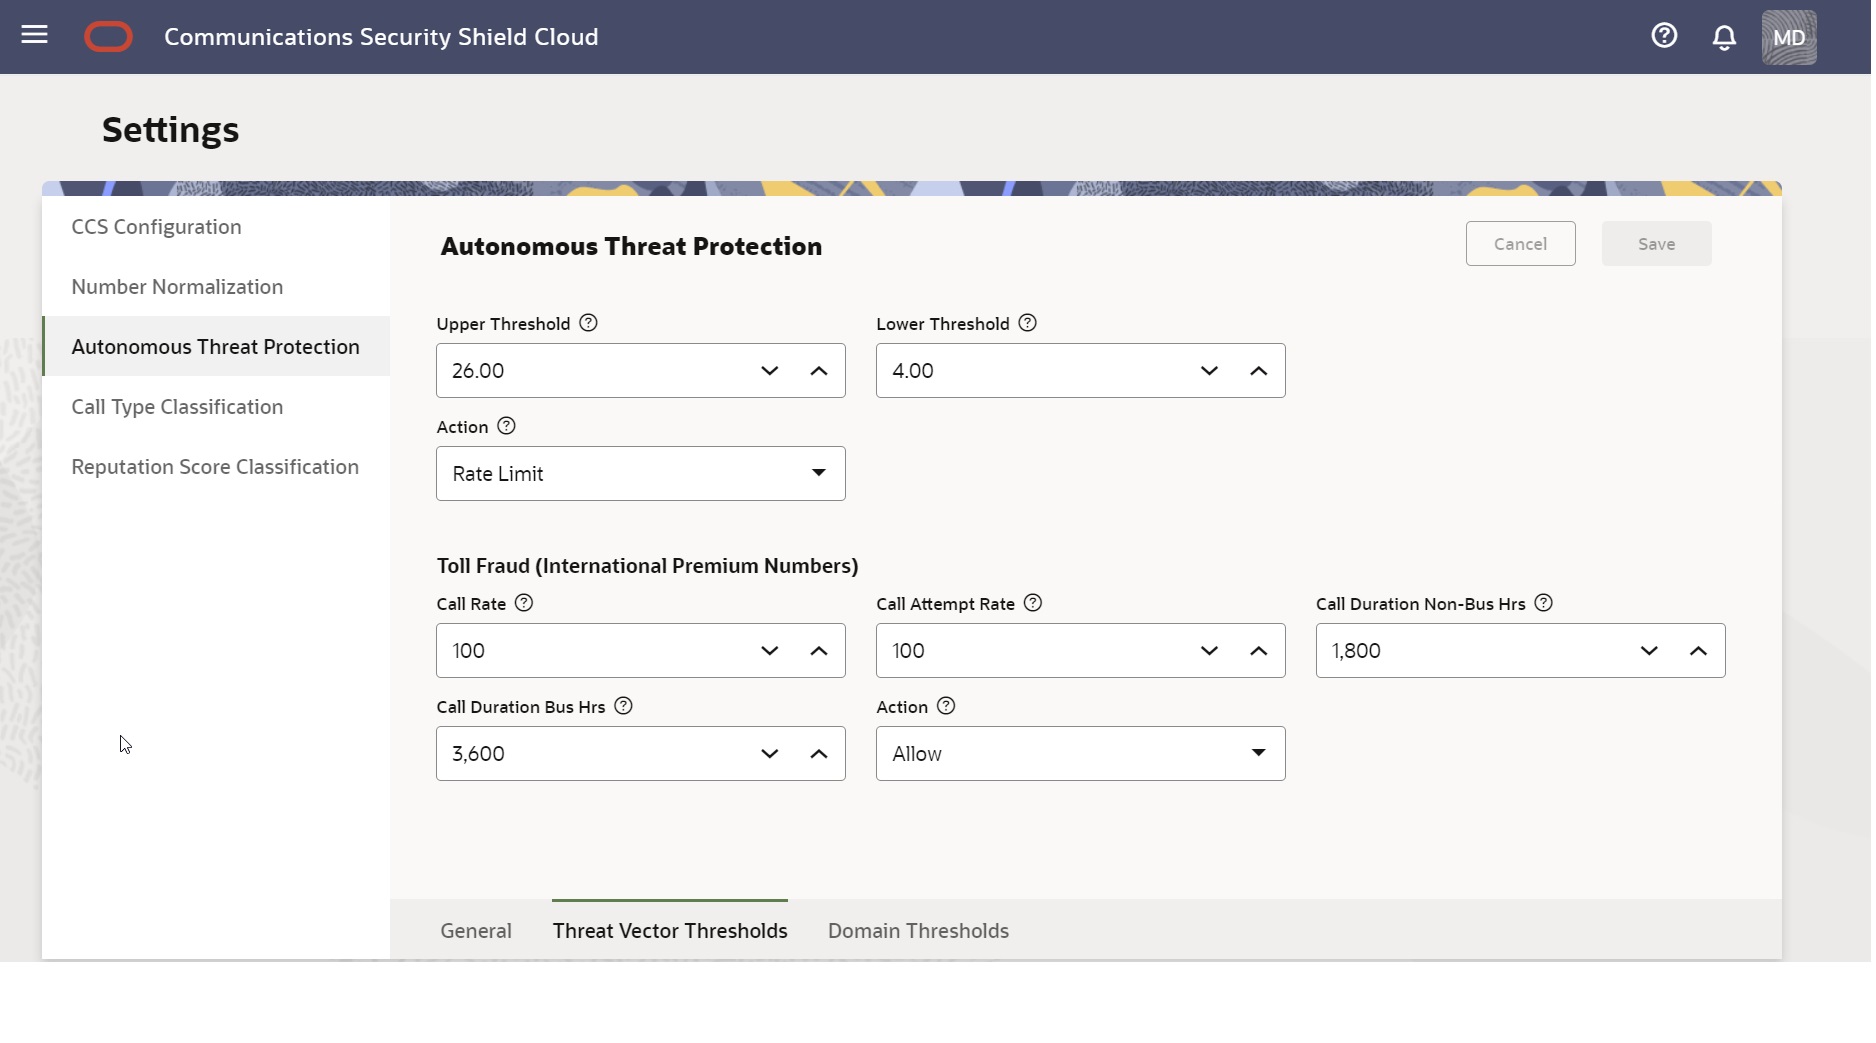 This screen capture shows the Threat Vector Thresholds dialog where you can change the default settings for telephony denial of service, traffic pumping, and toll fraud for international numbers to suit your needs.